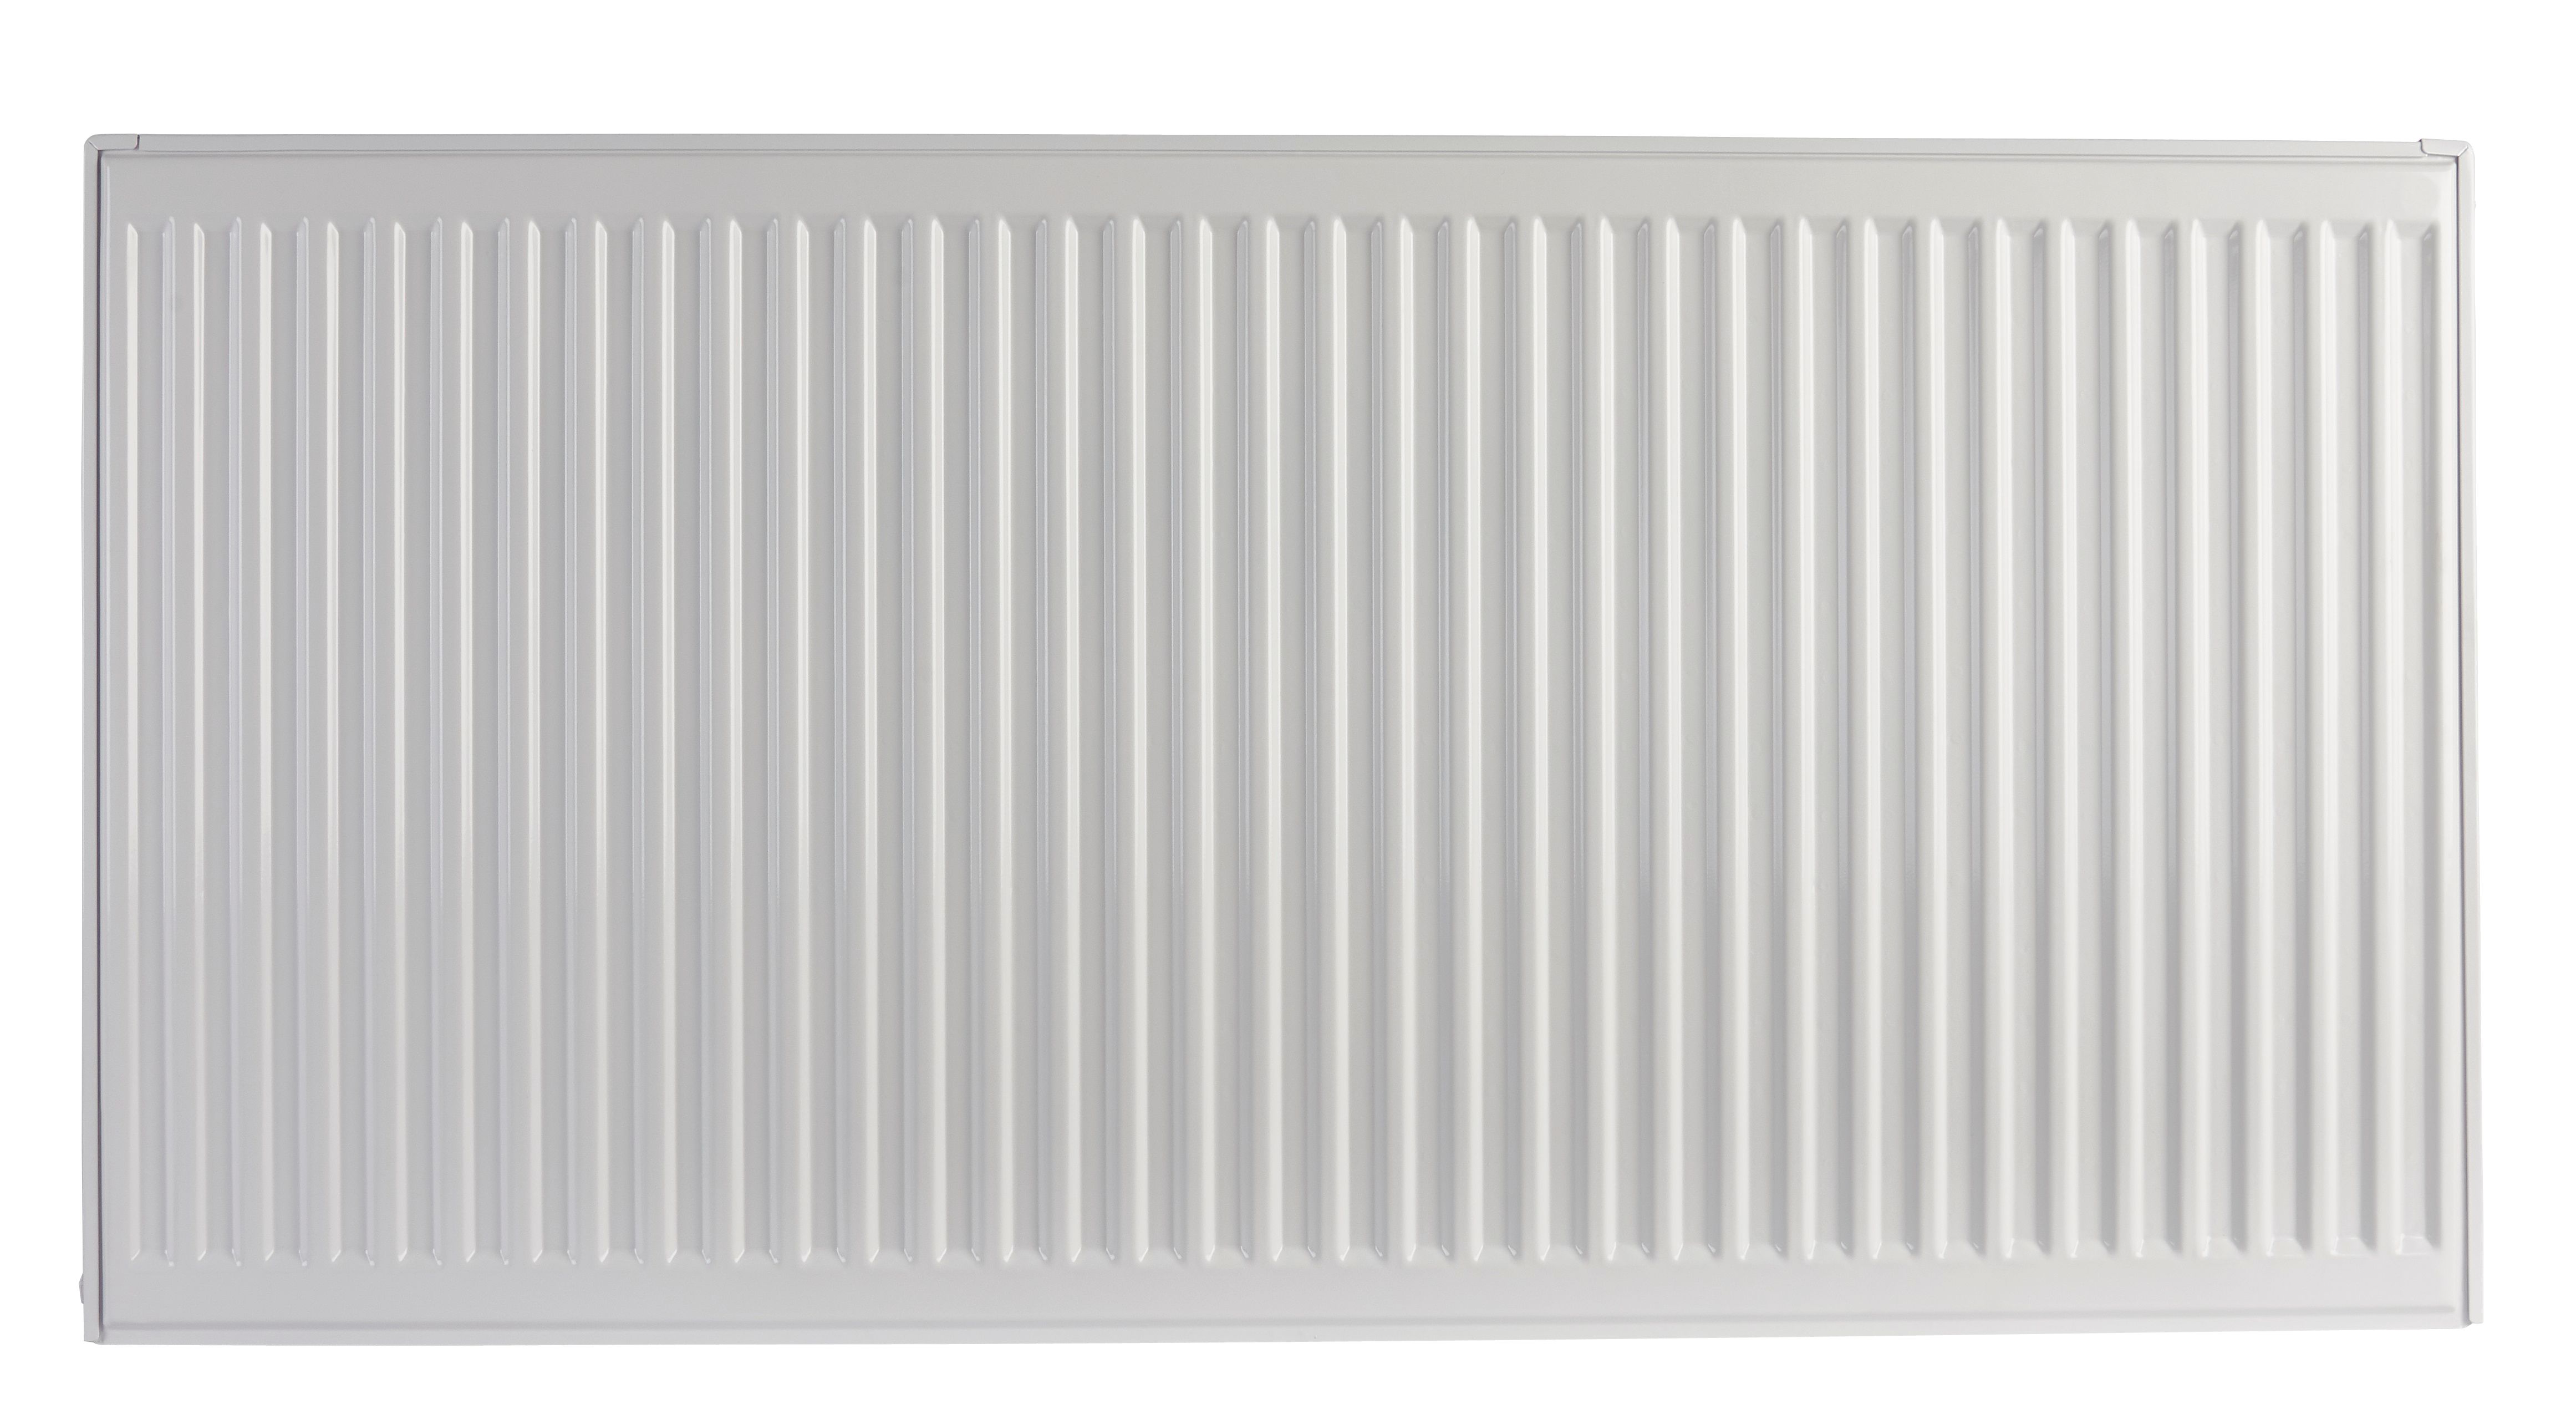 Image of Homeline by Stelrad 500 x 1600mm Type 22 Double Panel Premium Double Convector Radiator